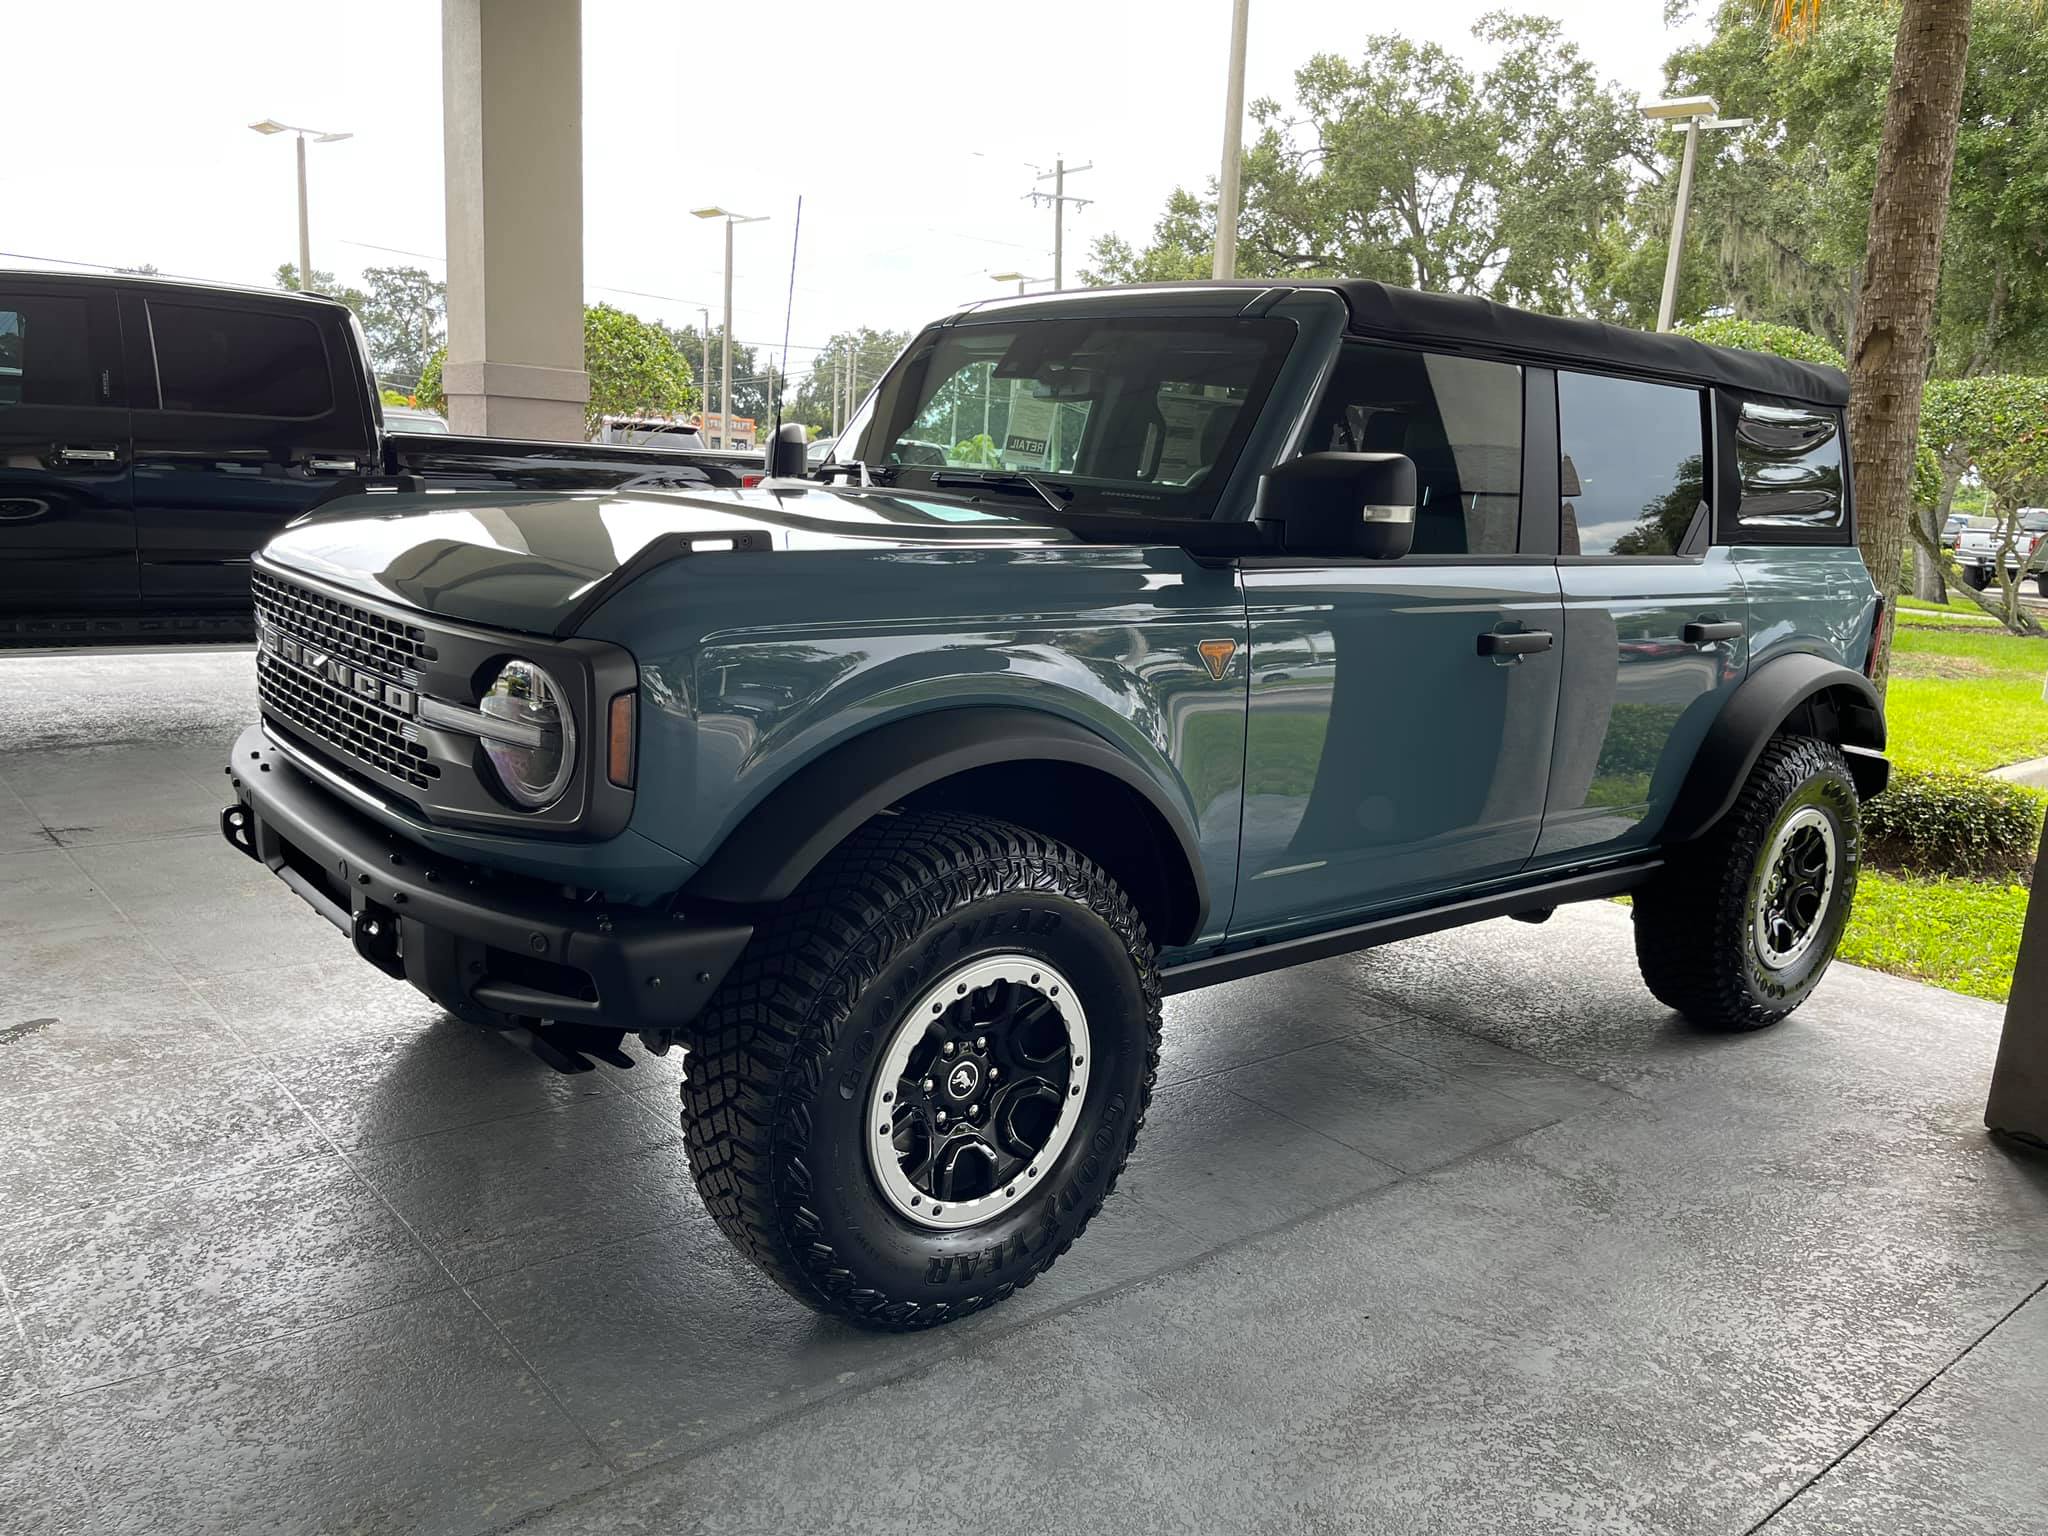 Ford Bronco 2x1 Tuesday! Let's see those before & after photos. 303437463_171013558839357_7613529927935099159_n